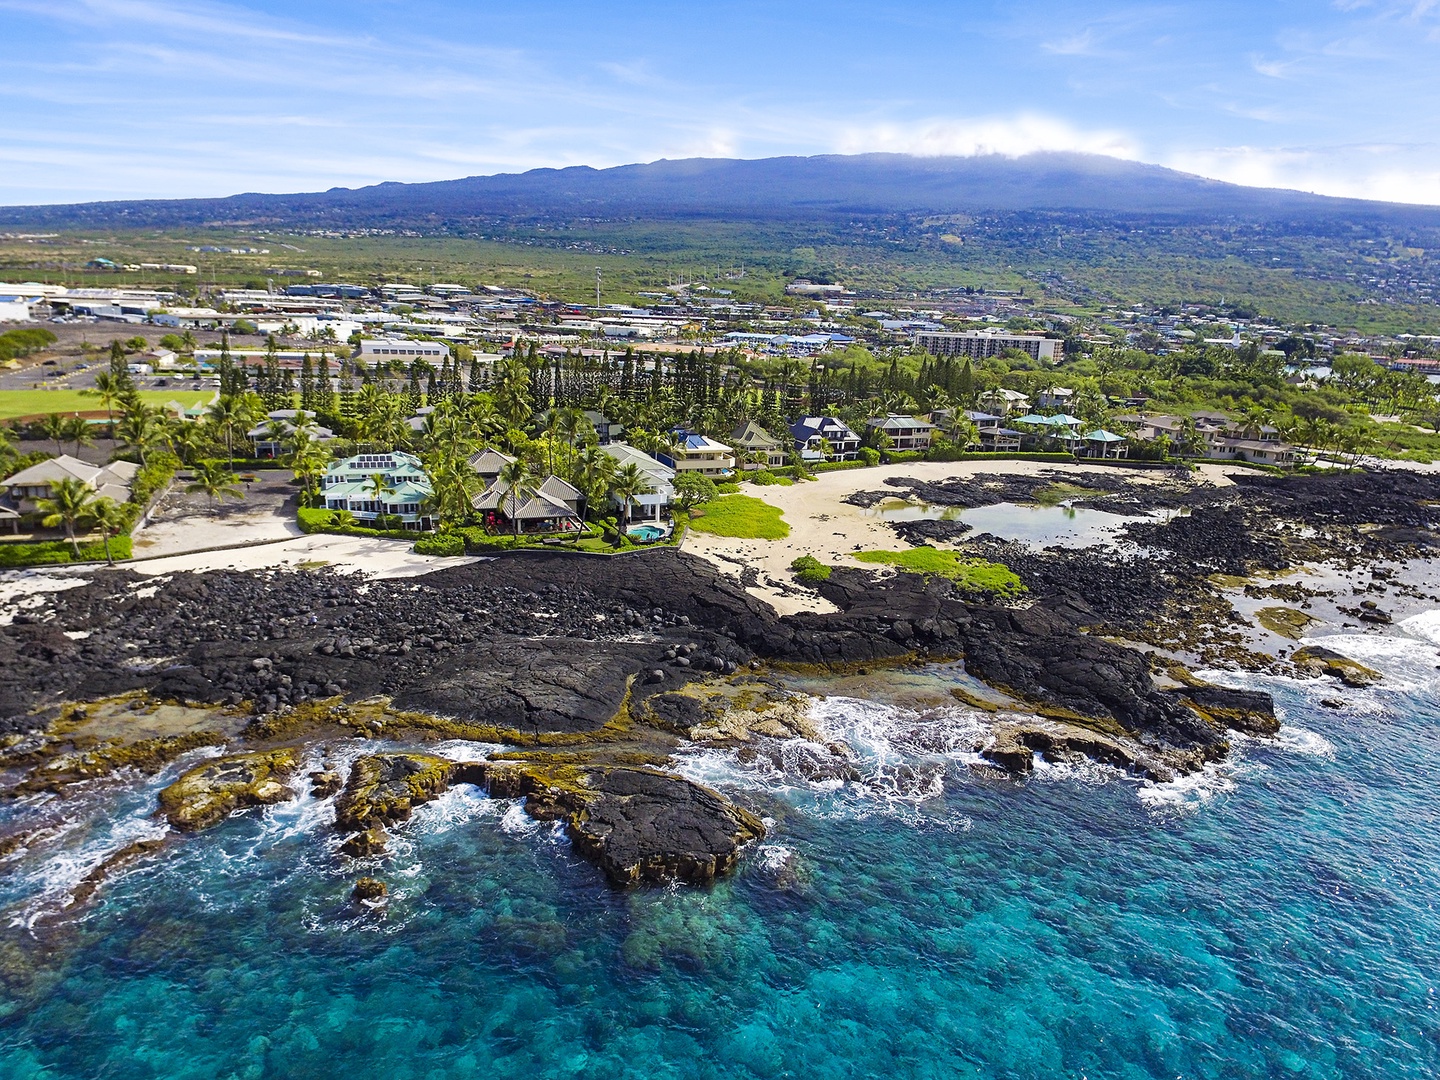 Kailua Kona Vacation Rentals, Mermaid Cove - Crystal clear Pacific waters as far as the eye can see!